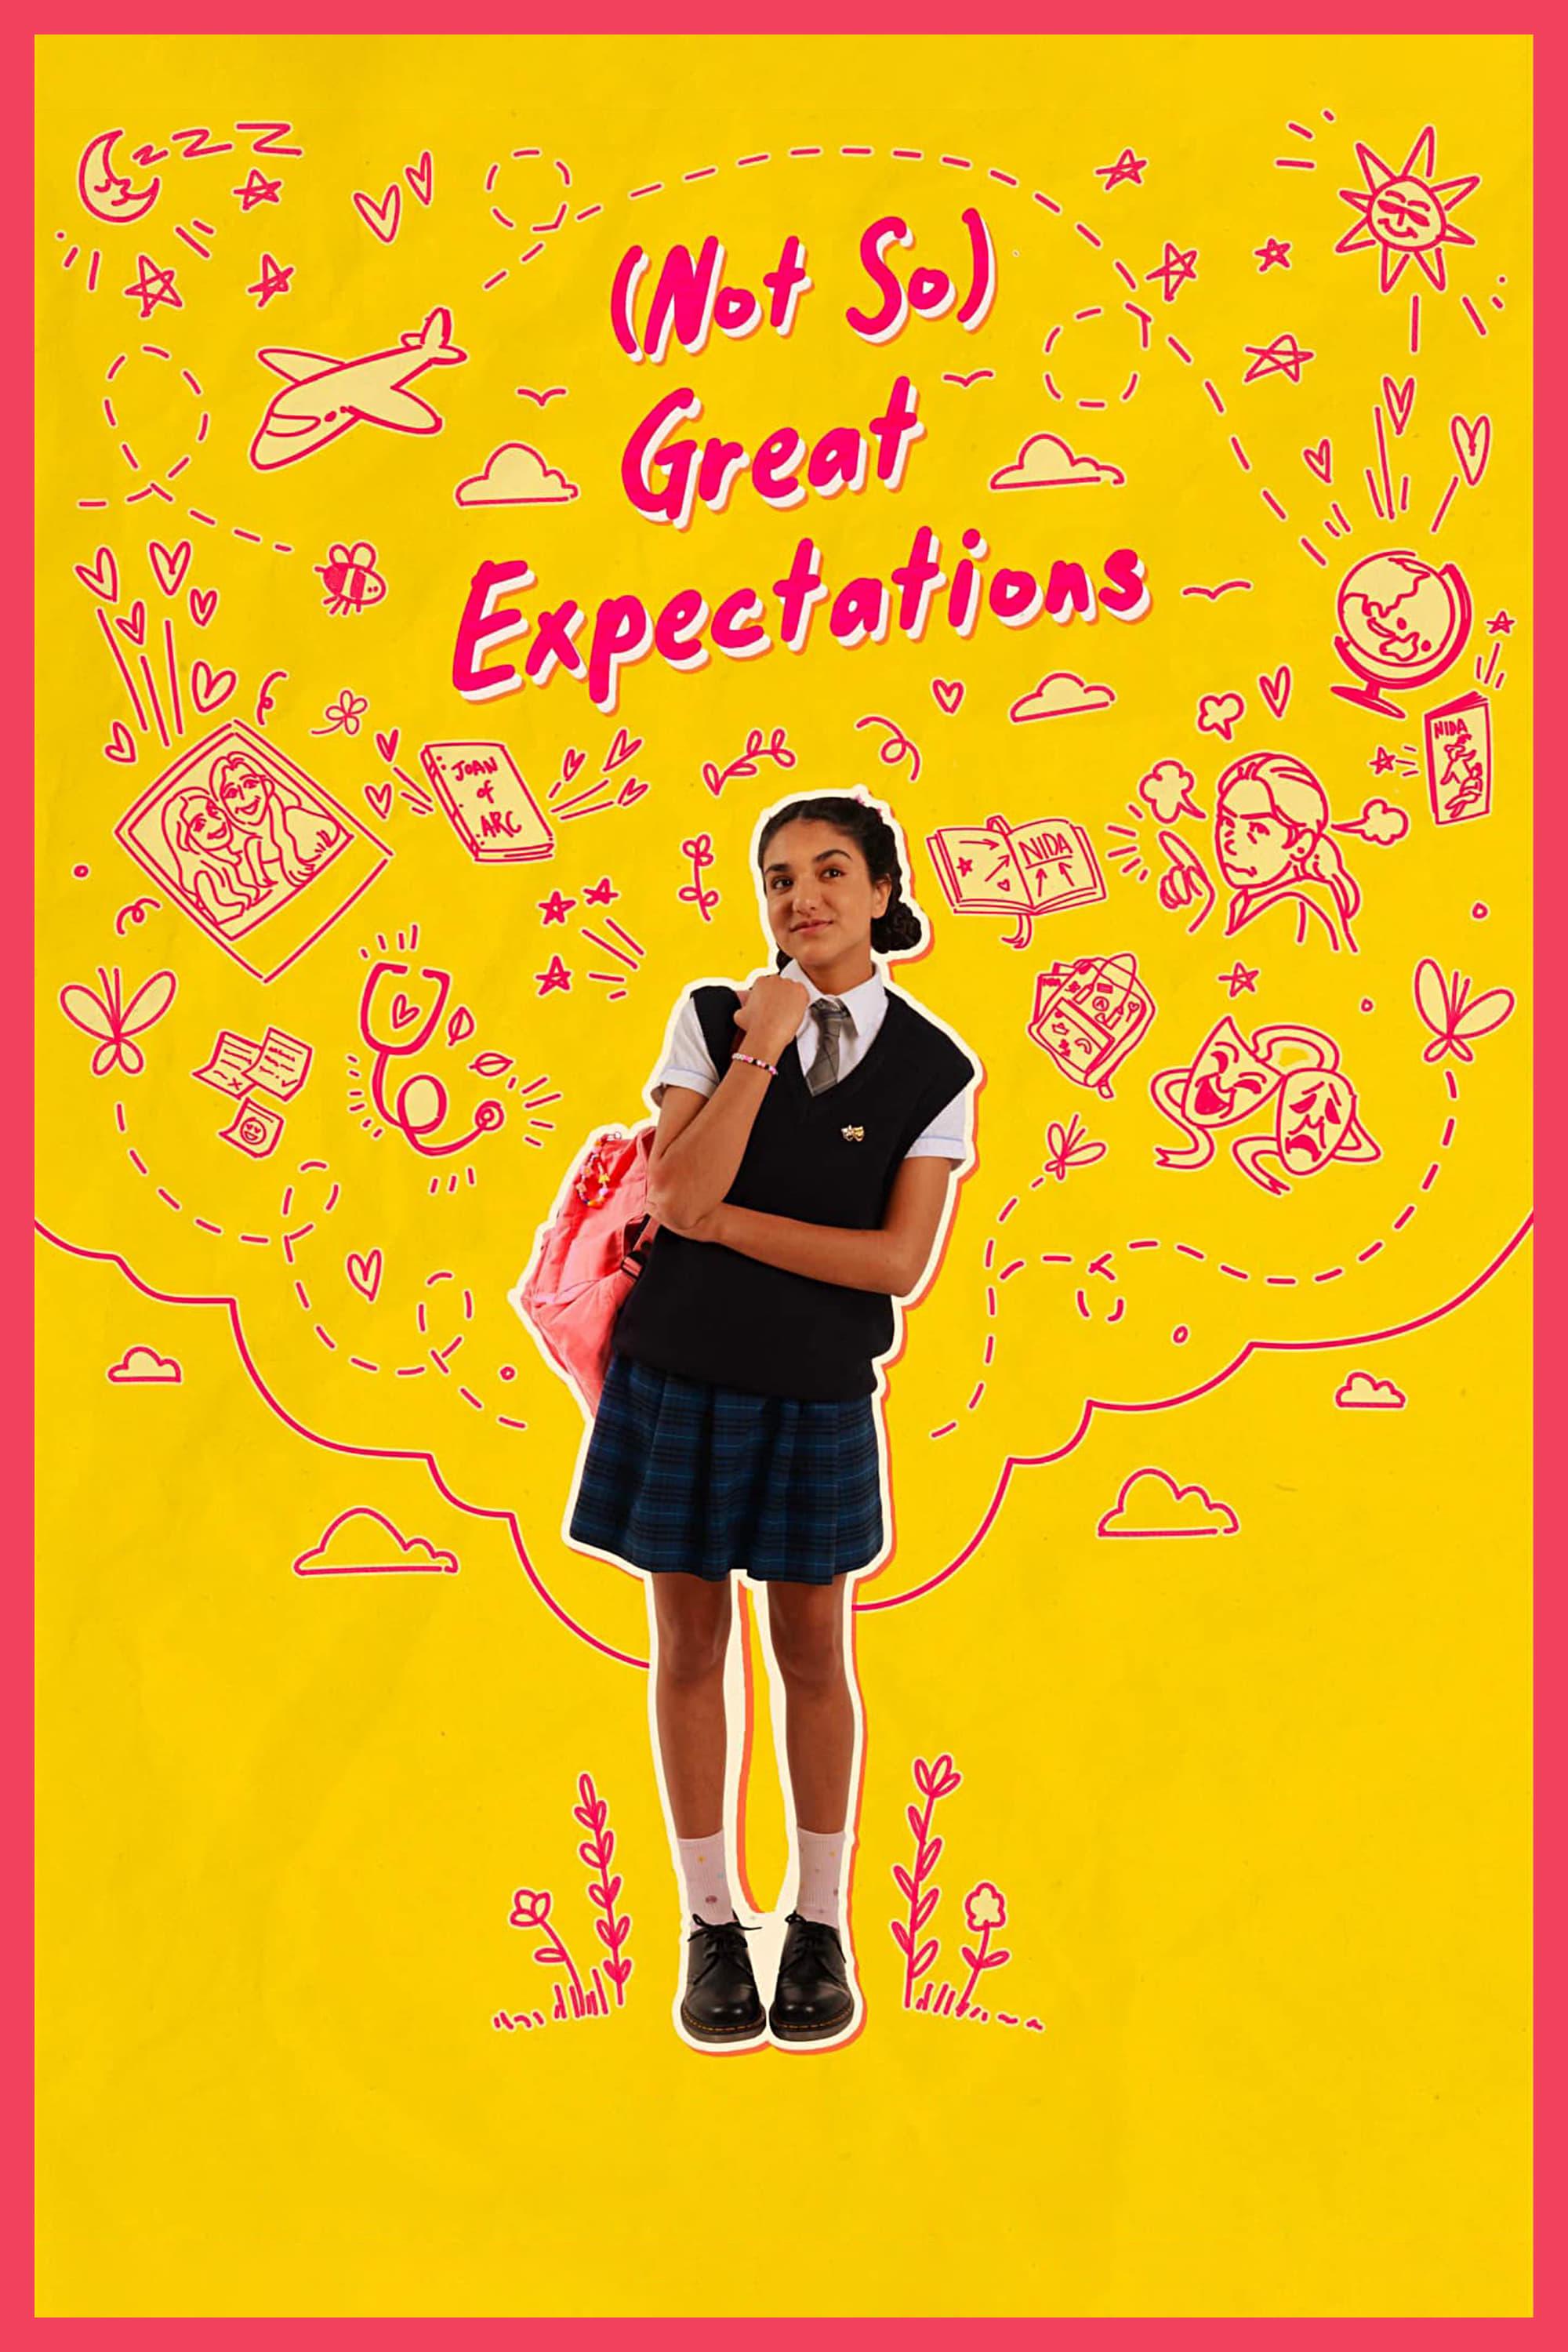 (Not So) Great Expectations poster